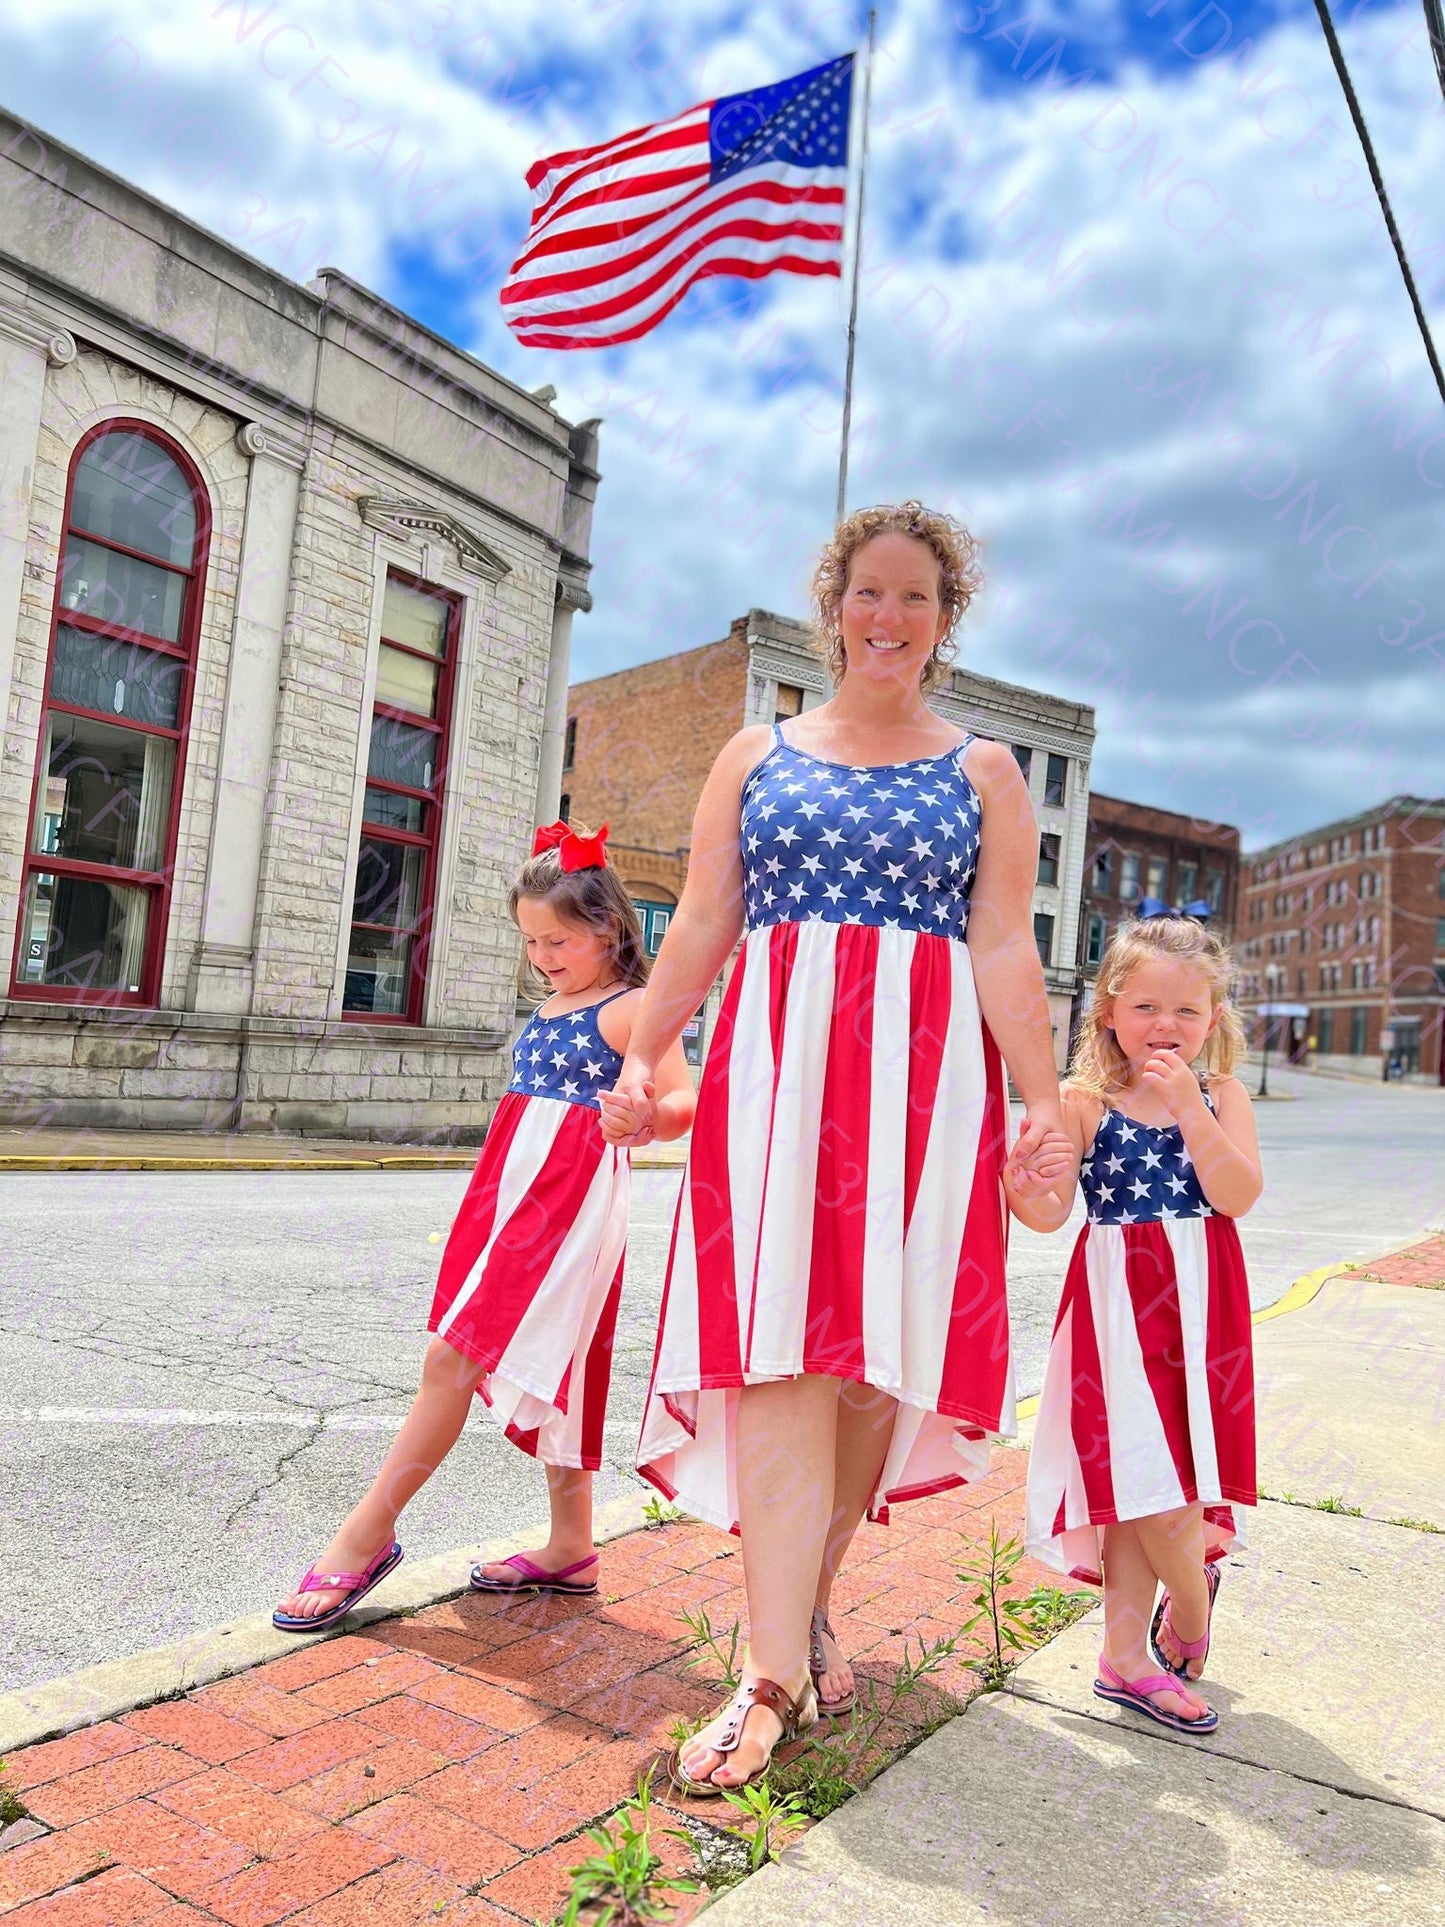 RTS: Mommy and me High Low Flag Dress